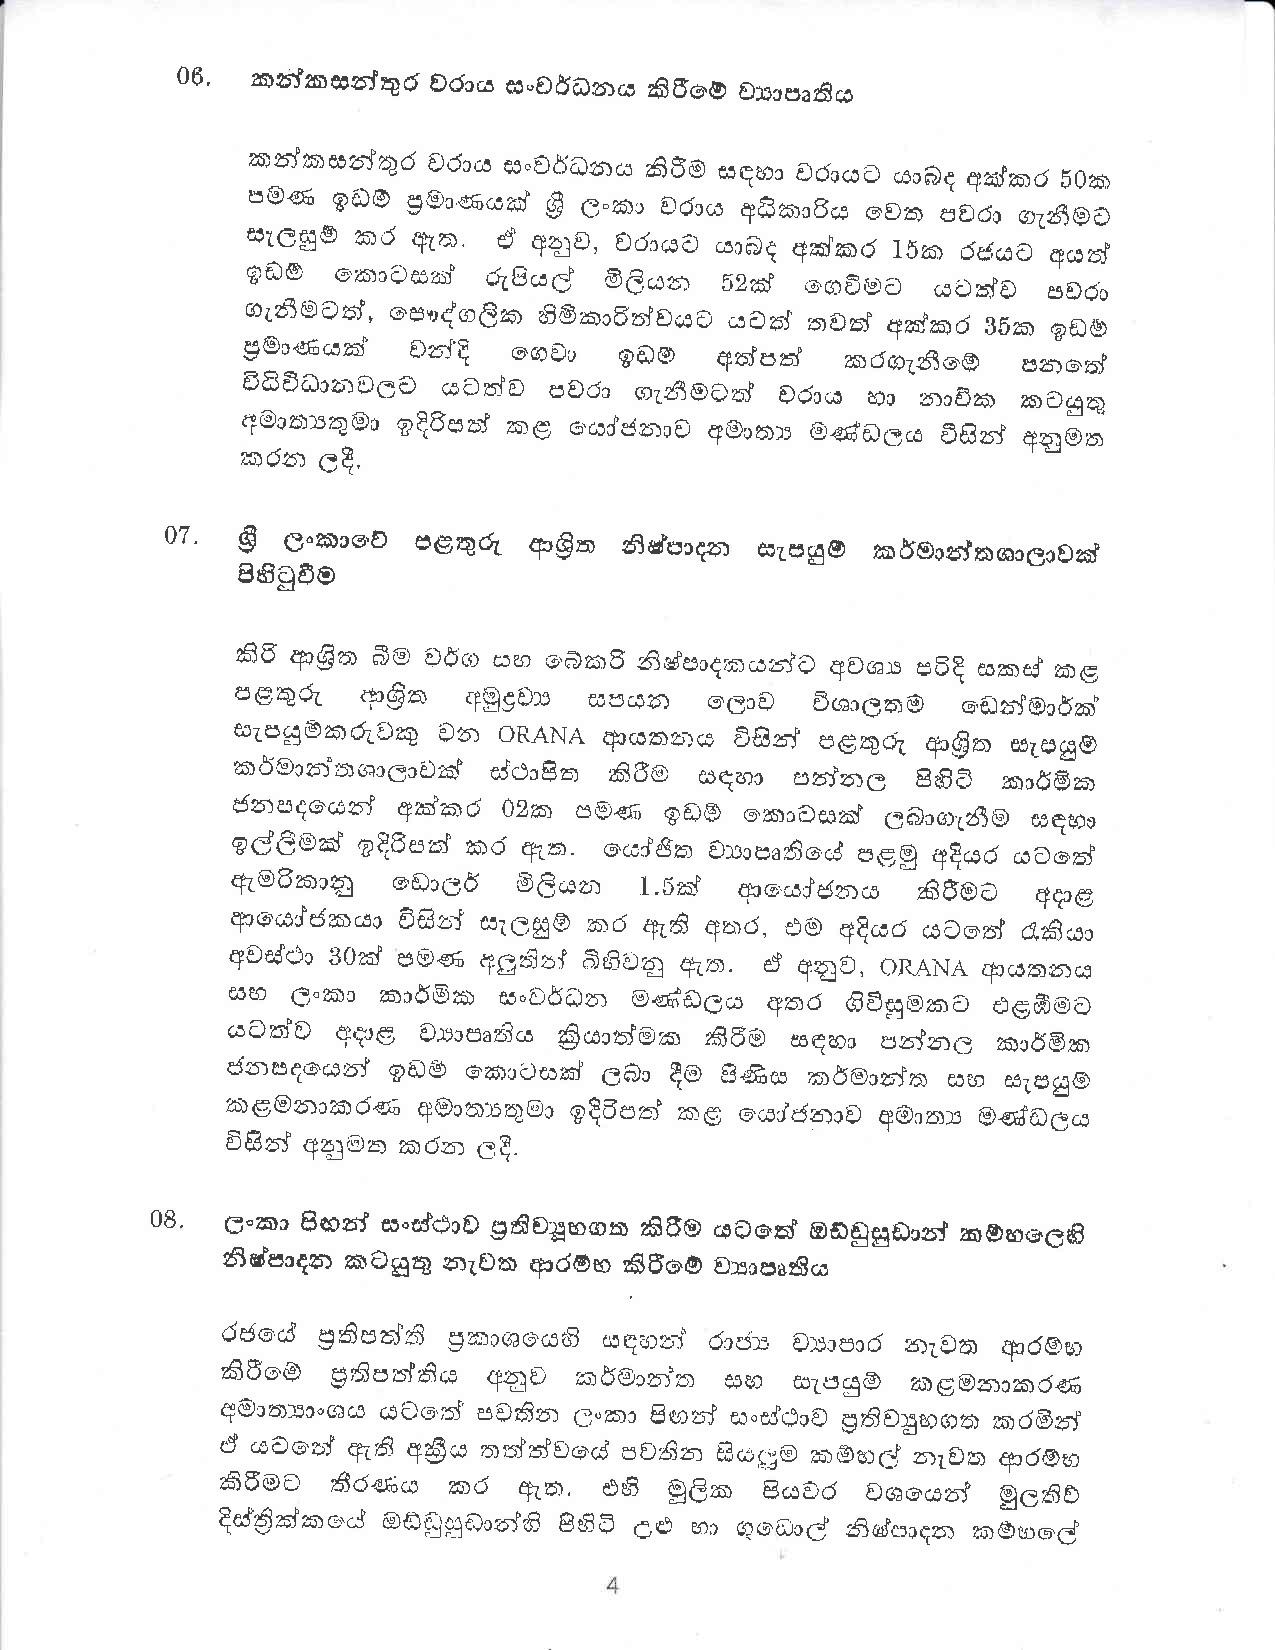 Cabinet Decision on 05.02.2020 page 004